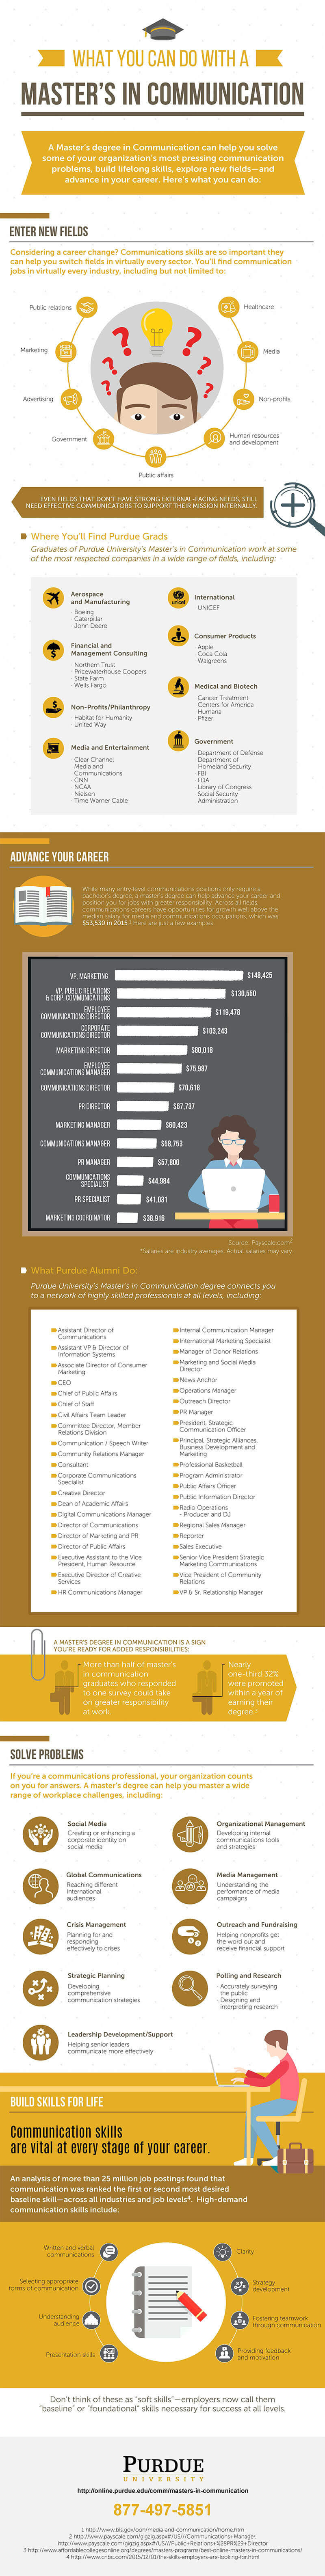 Infographic outlining what you can do with a master's in communication: enter new fields, advance your career, solve problems, and build skills for life.